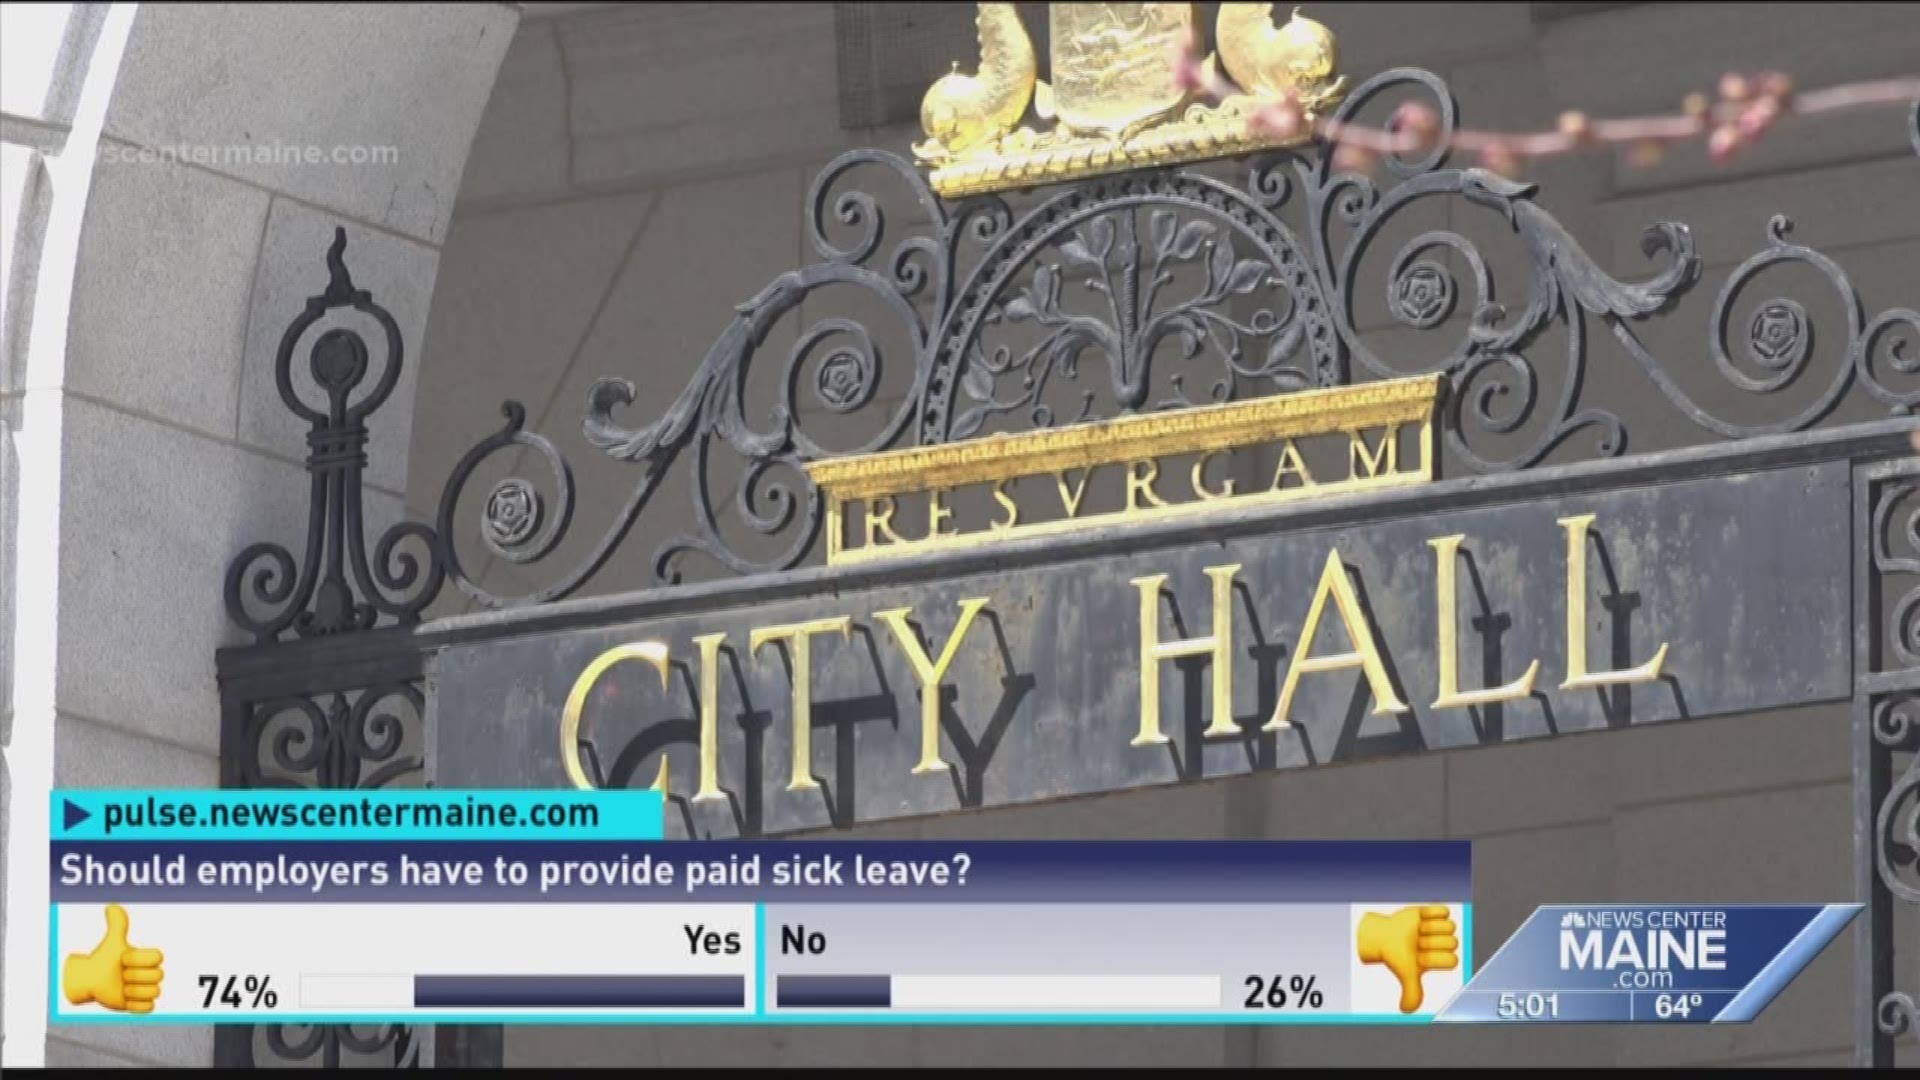 NOW: Paid sick leave proposal